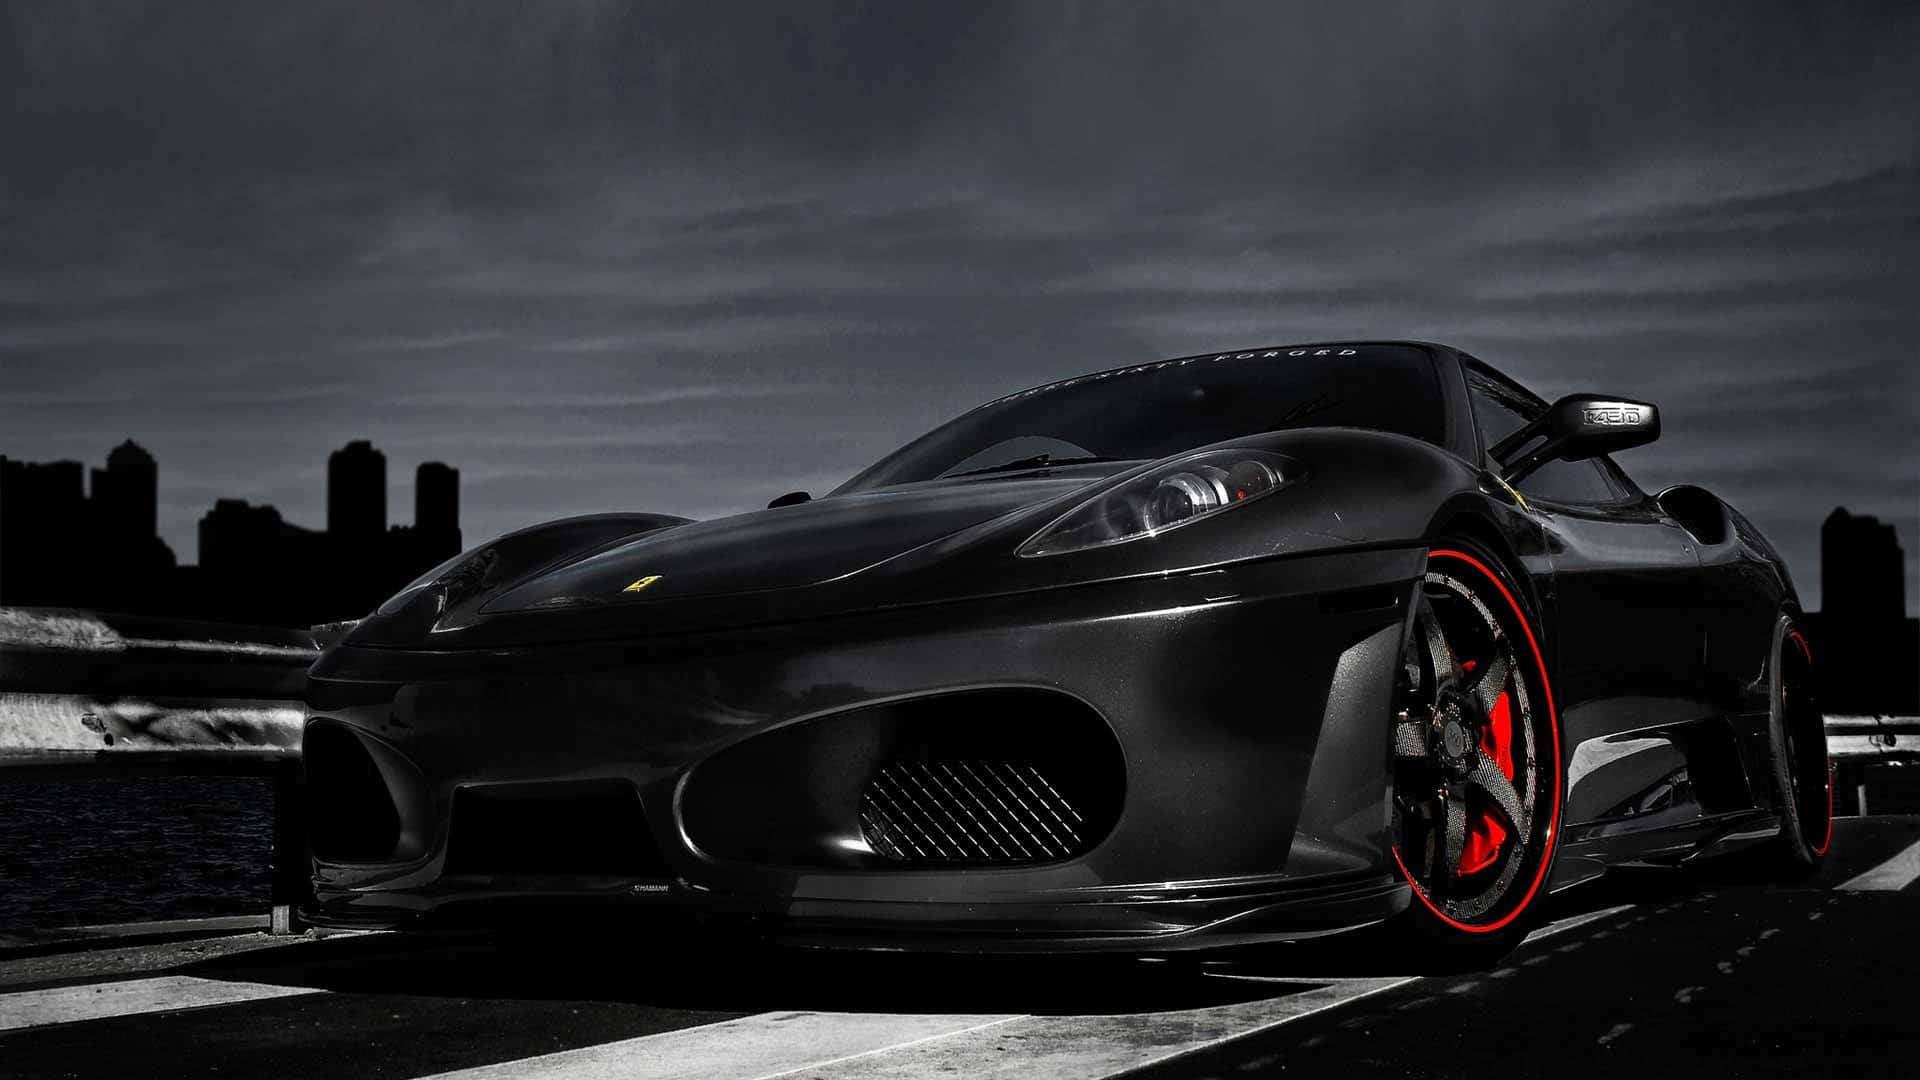 Image  Boost your adrenaline levels with a Cool Ferrari car Wallpaper